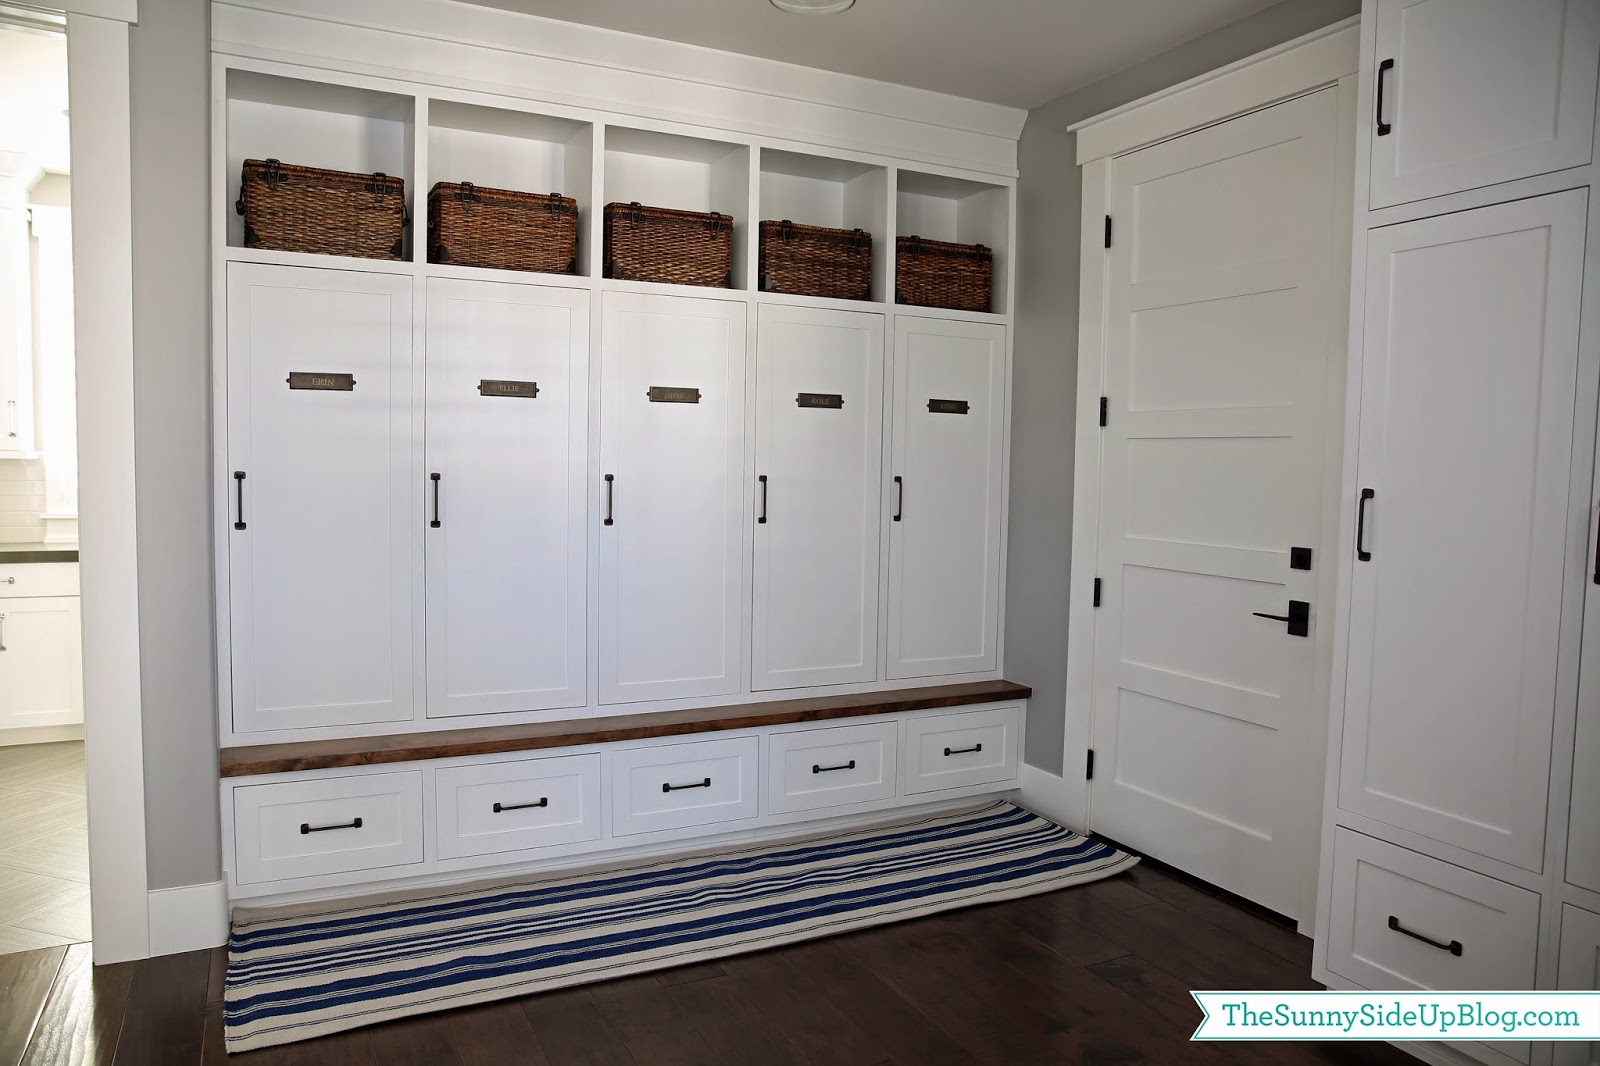 New Mudroom Rug: How to Pick the Perfect Rug